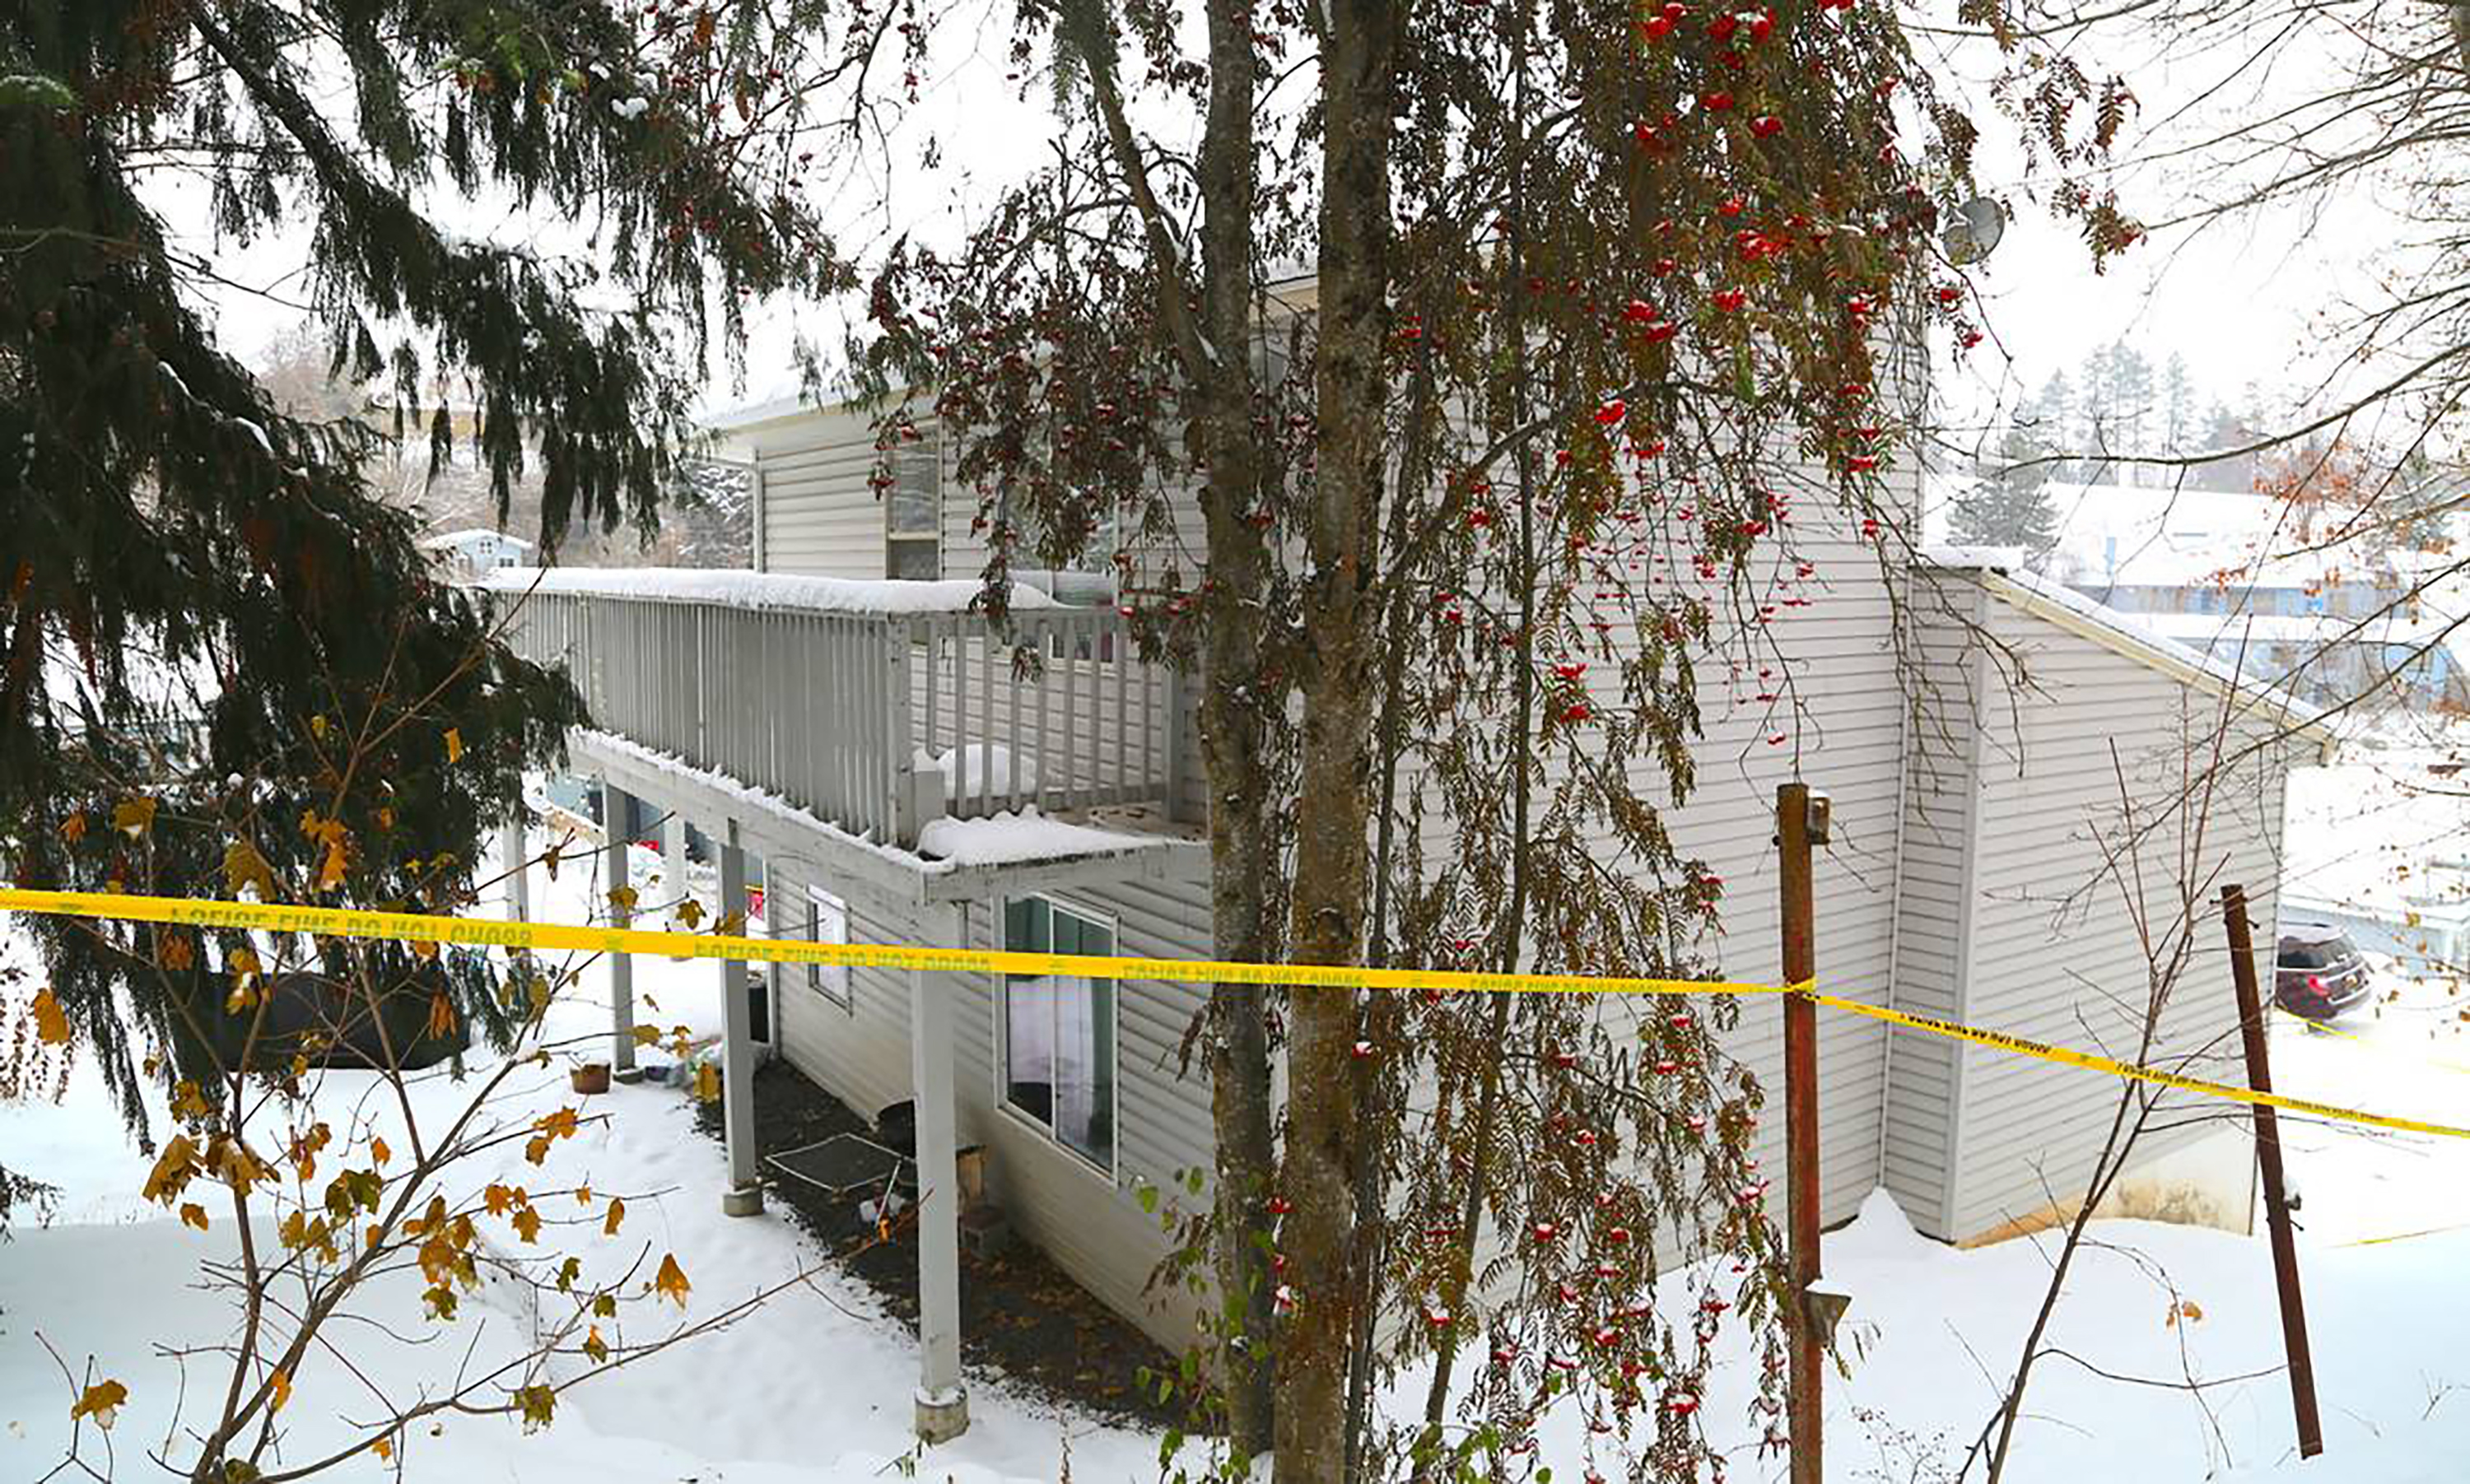 A view from the back of the house where police found four University of Idaho students stabbed to death on November 13.